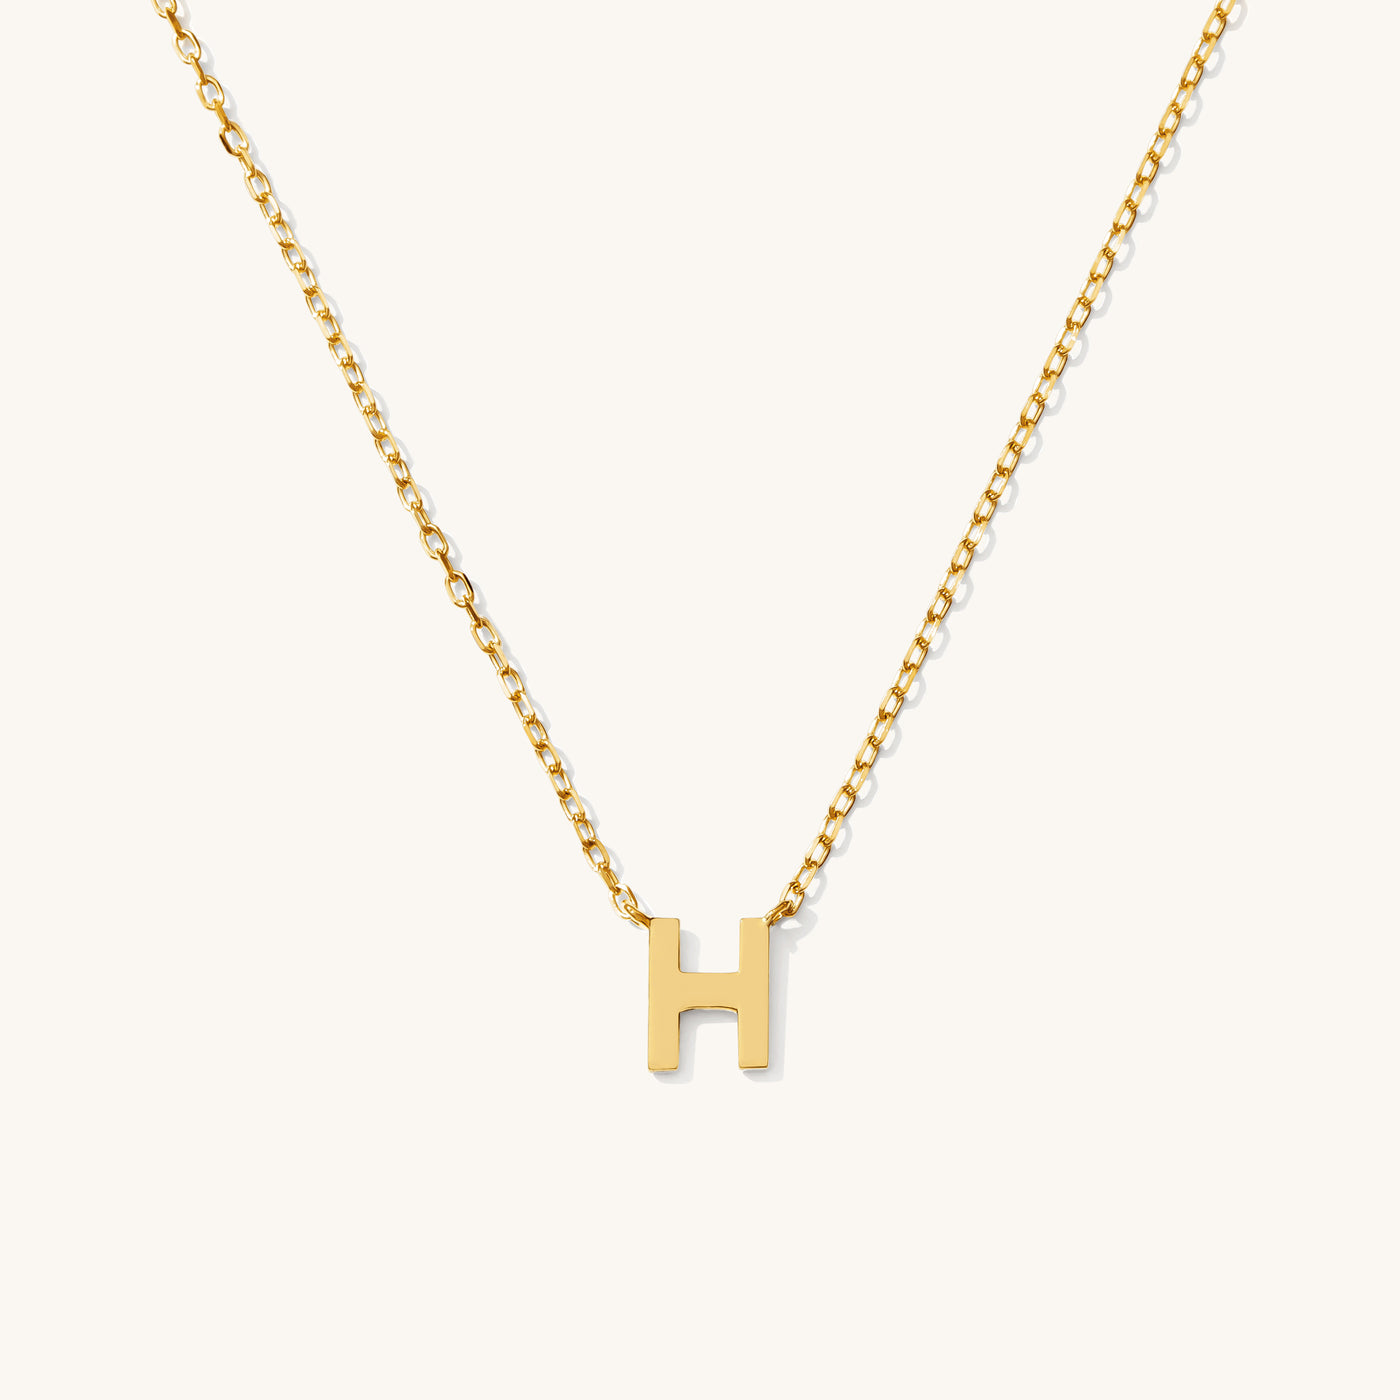 H Tiny Initial Necklace - 14k Solid Gold